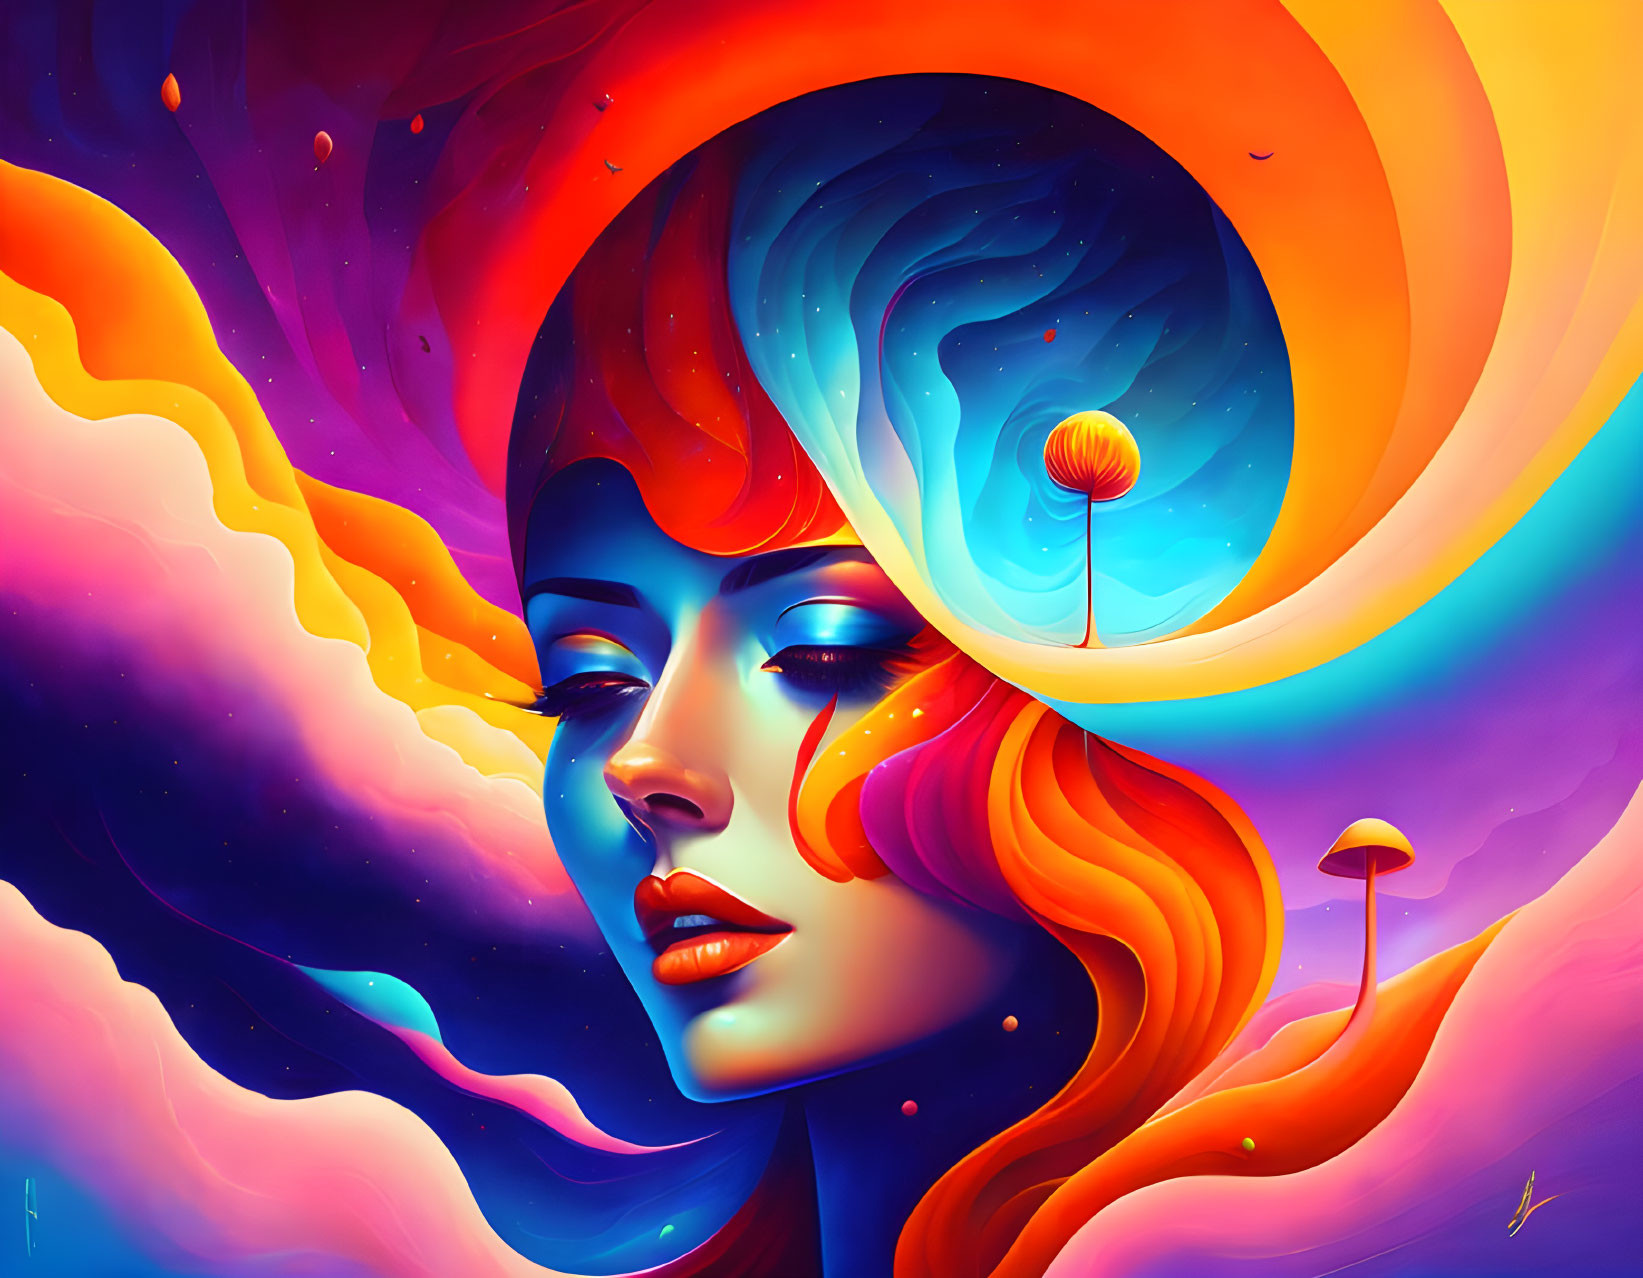 Digital Art: Woman's Face with Cosmic, Psychedelic Elements